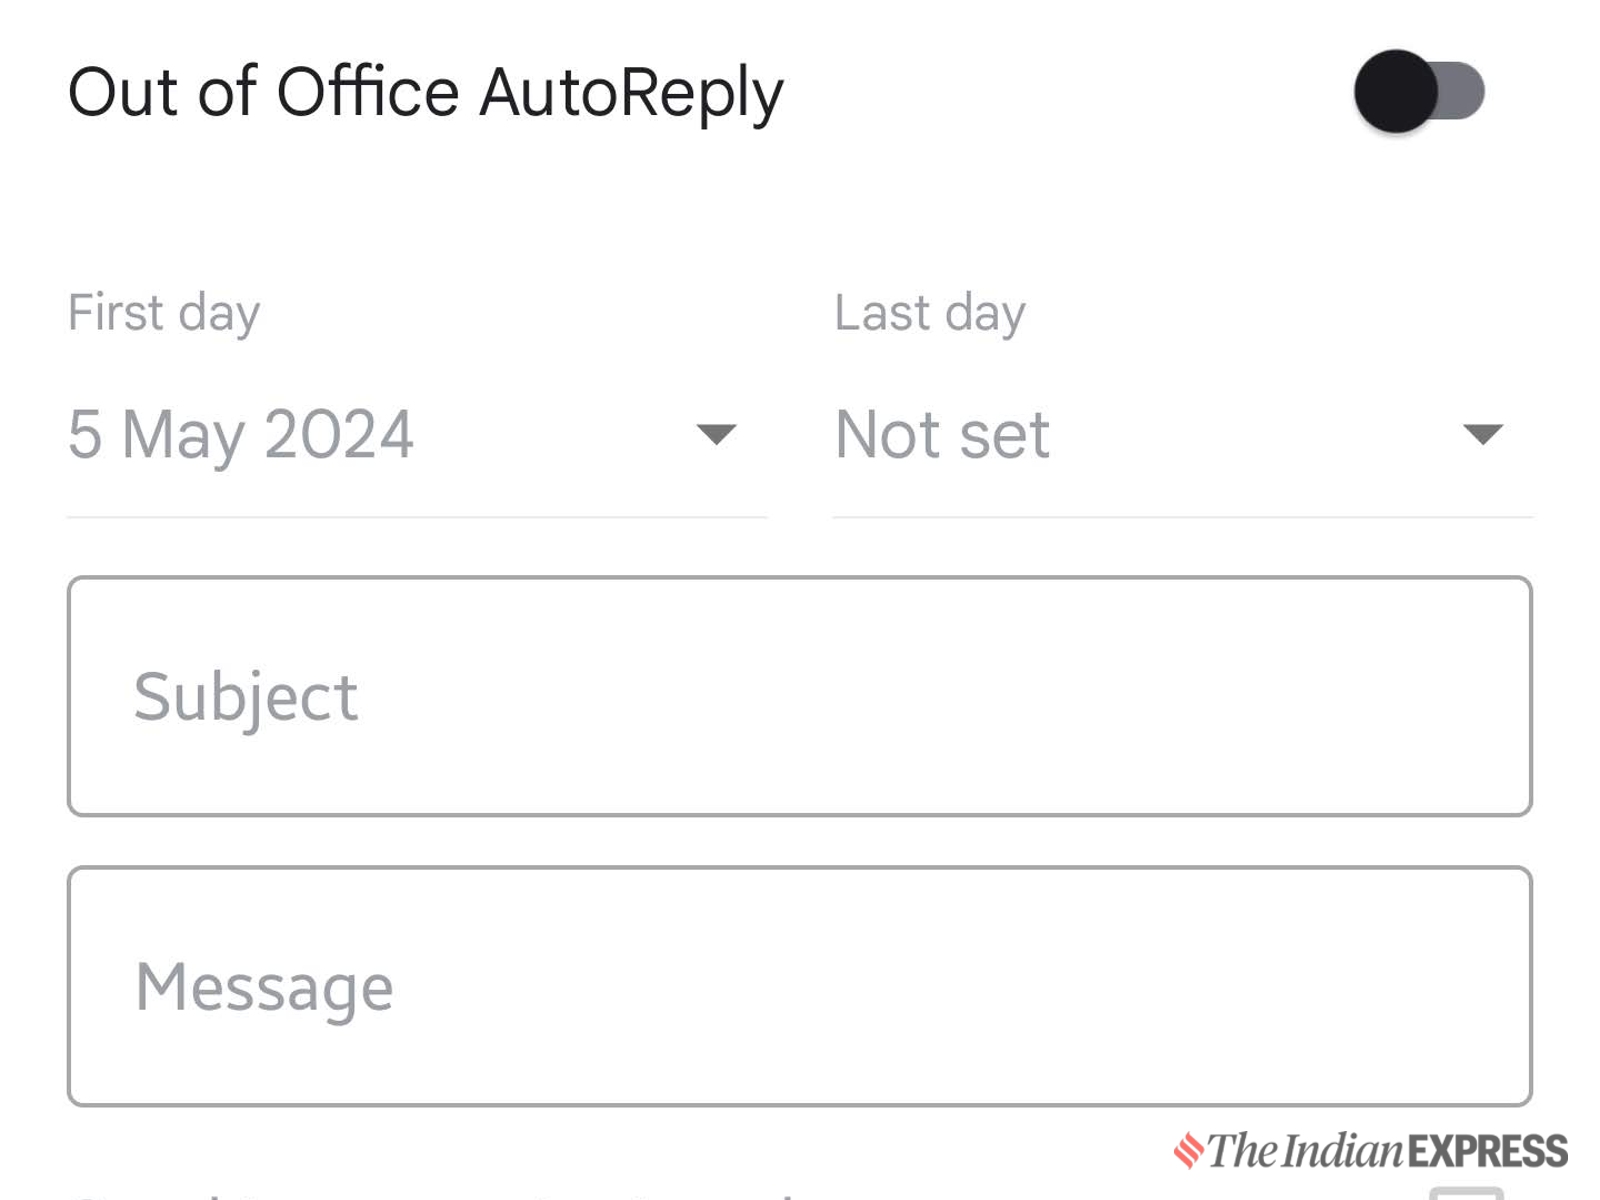 Out of office email